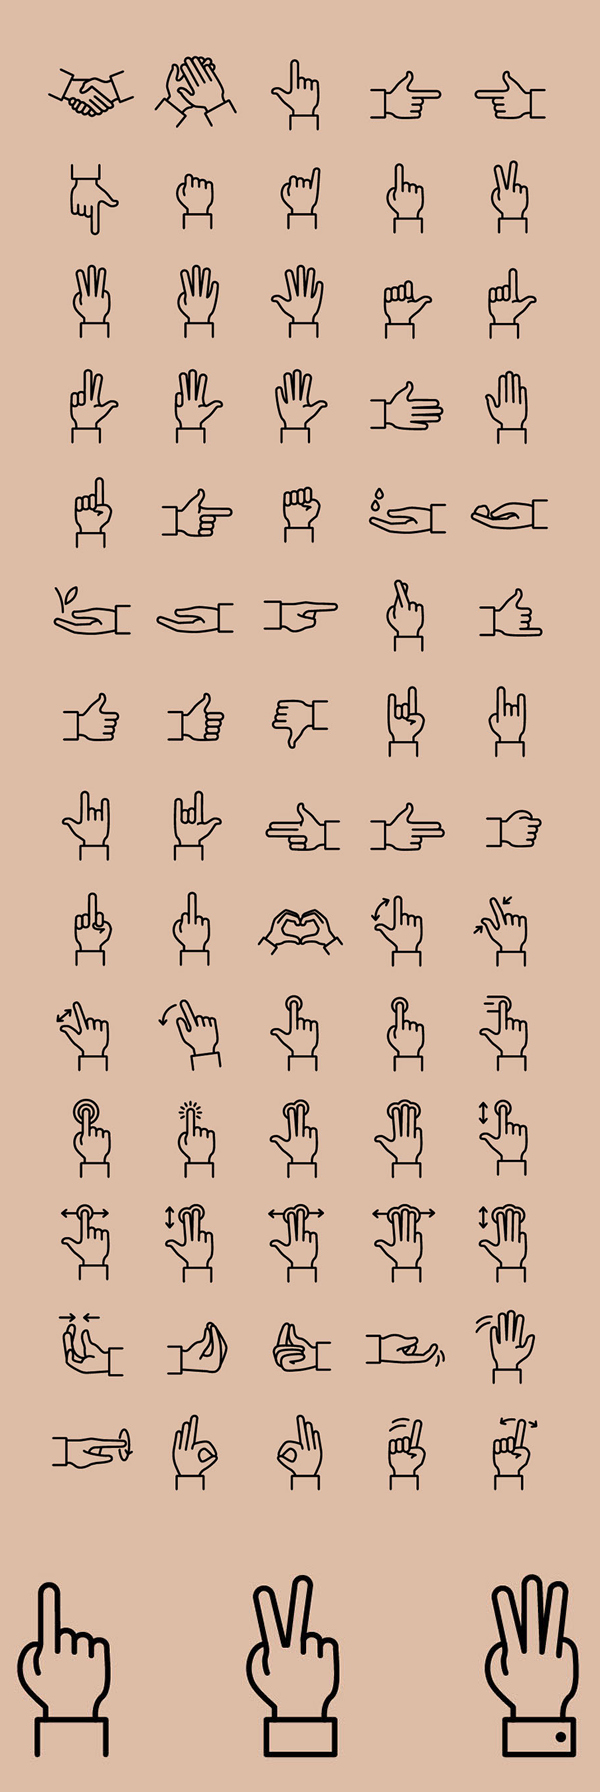 Free Hand Gestures Vector Graphics - 200+ Icons)